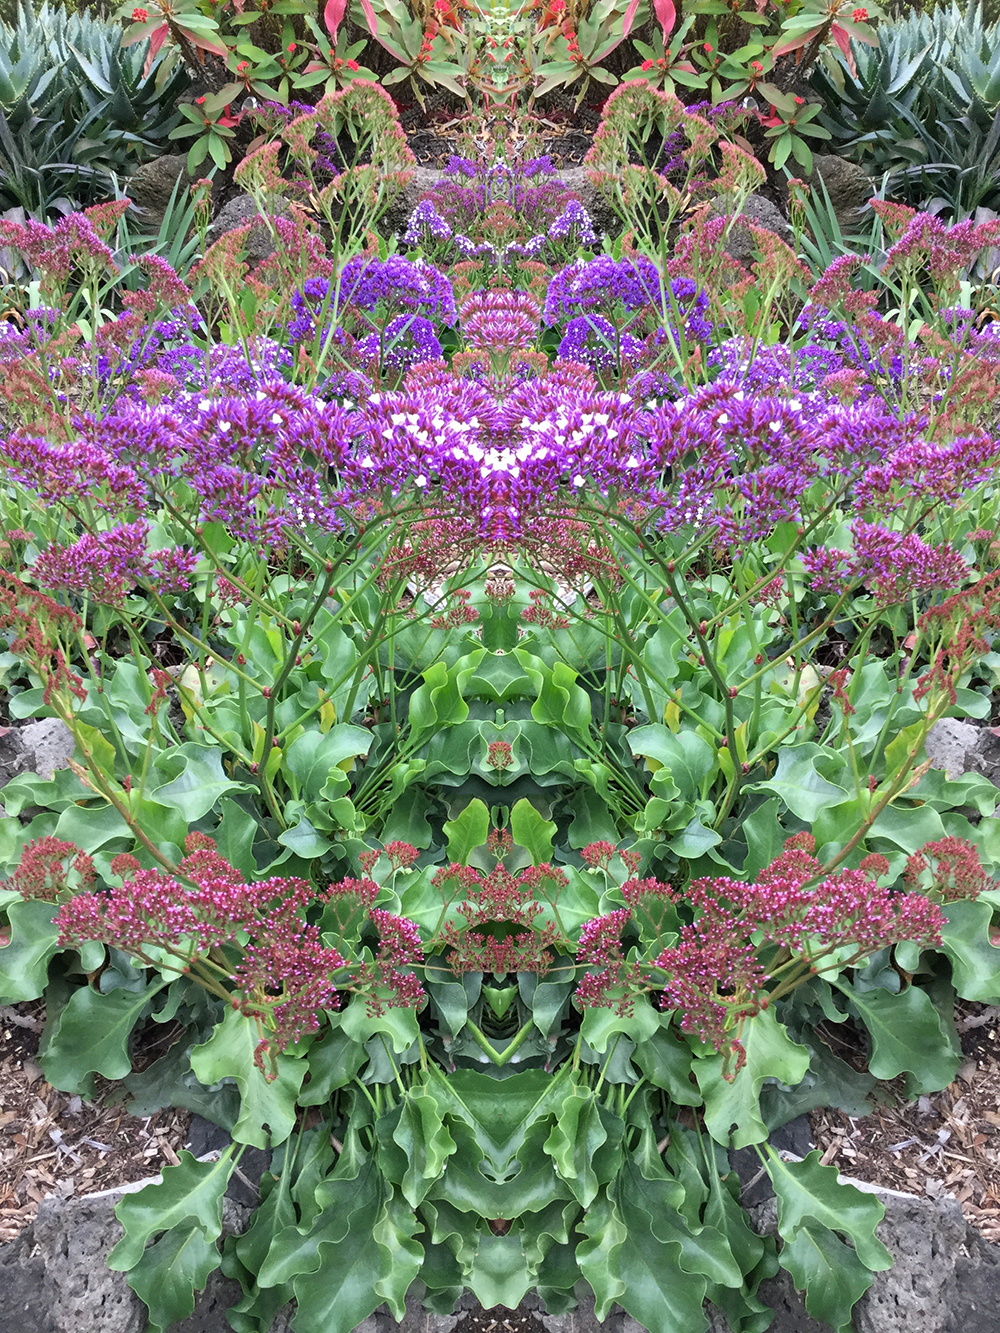 Photograph of flowers reflected making patterns